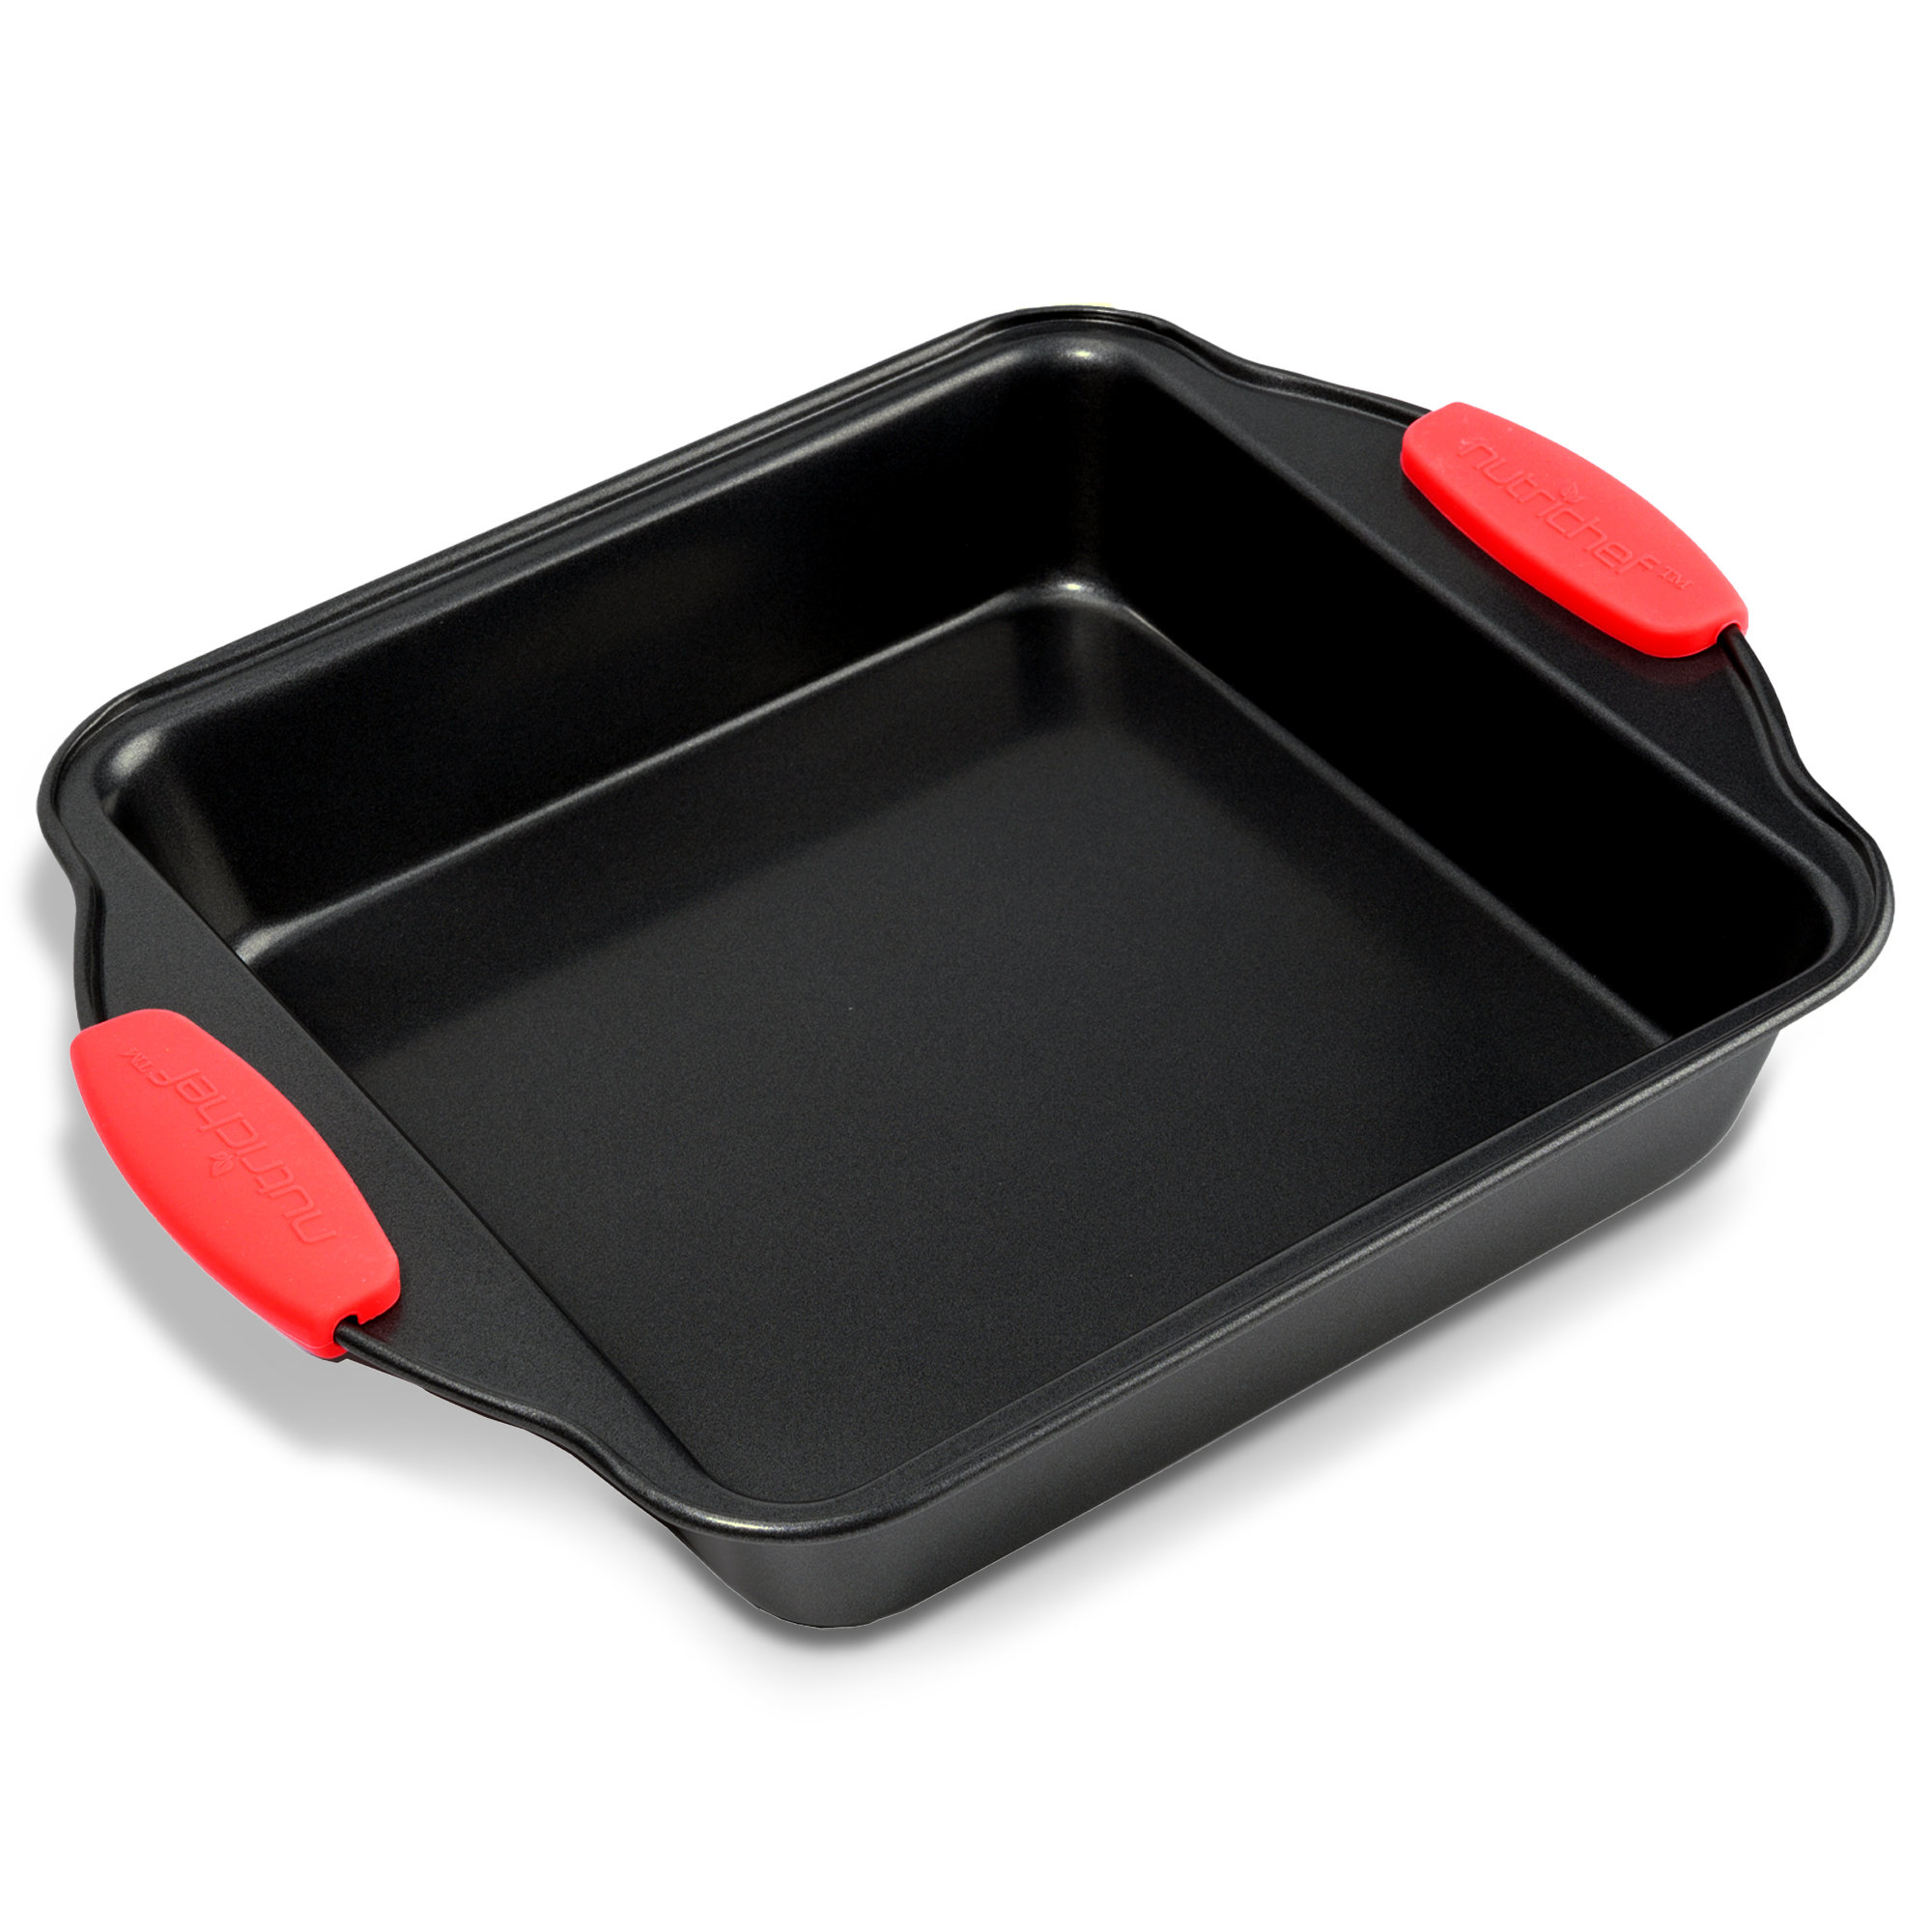 NutriChef Kitchen Oven Baking Pans - Deluxe Non-Stick Bake Tray